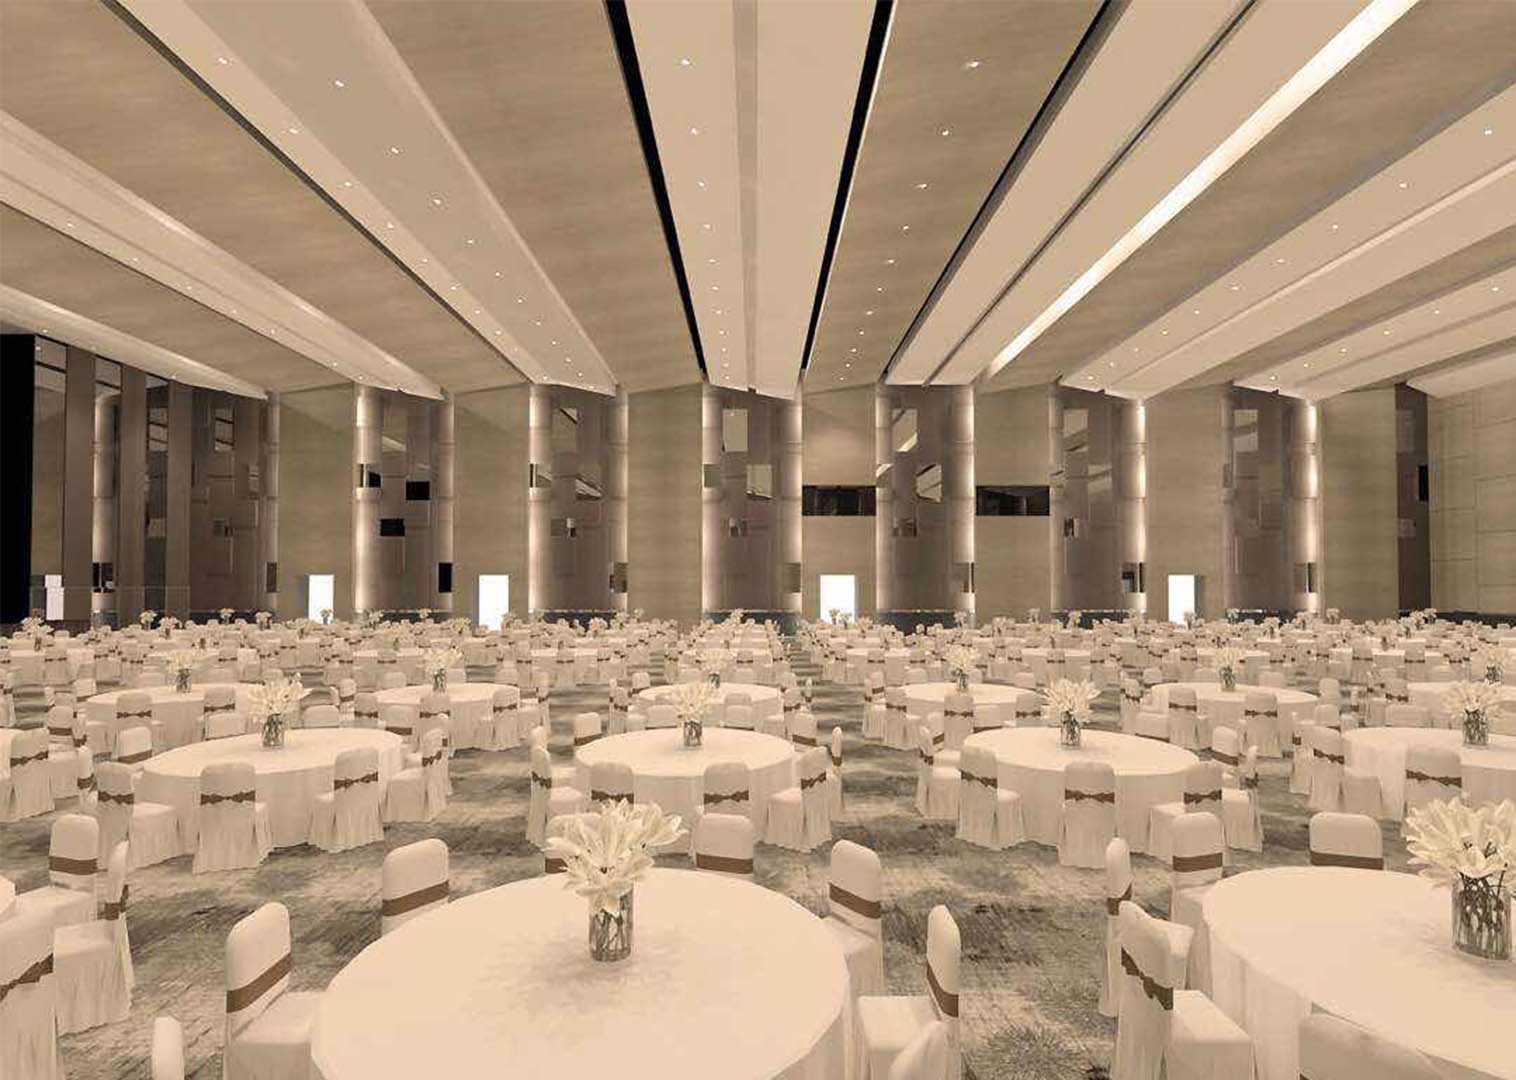 Banquet Hall of Helixuan Five-star Hotel in Malaysia